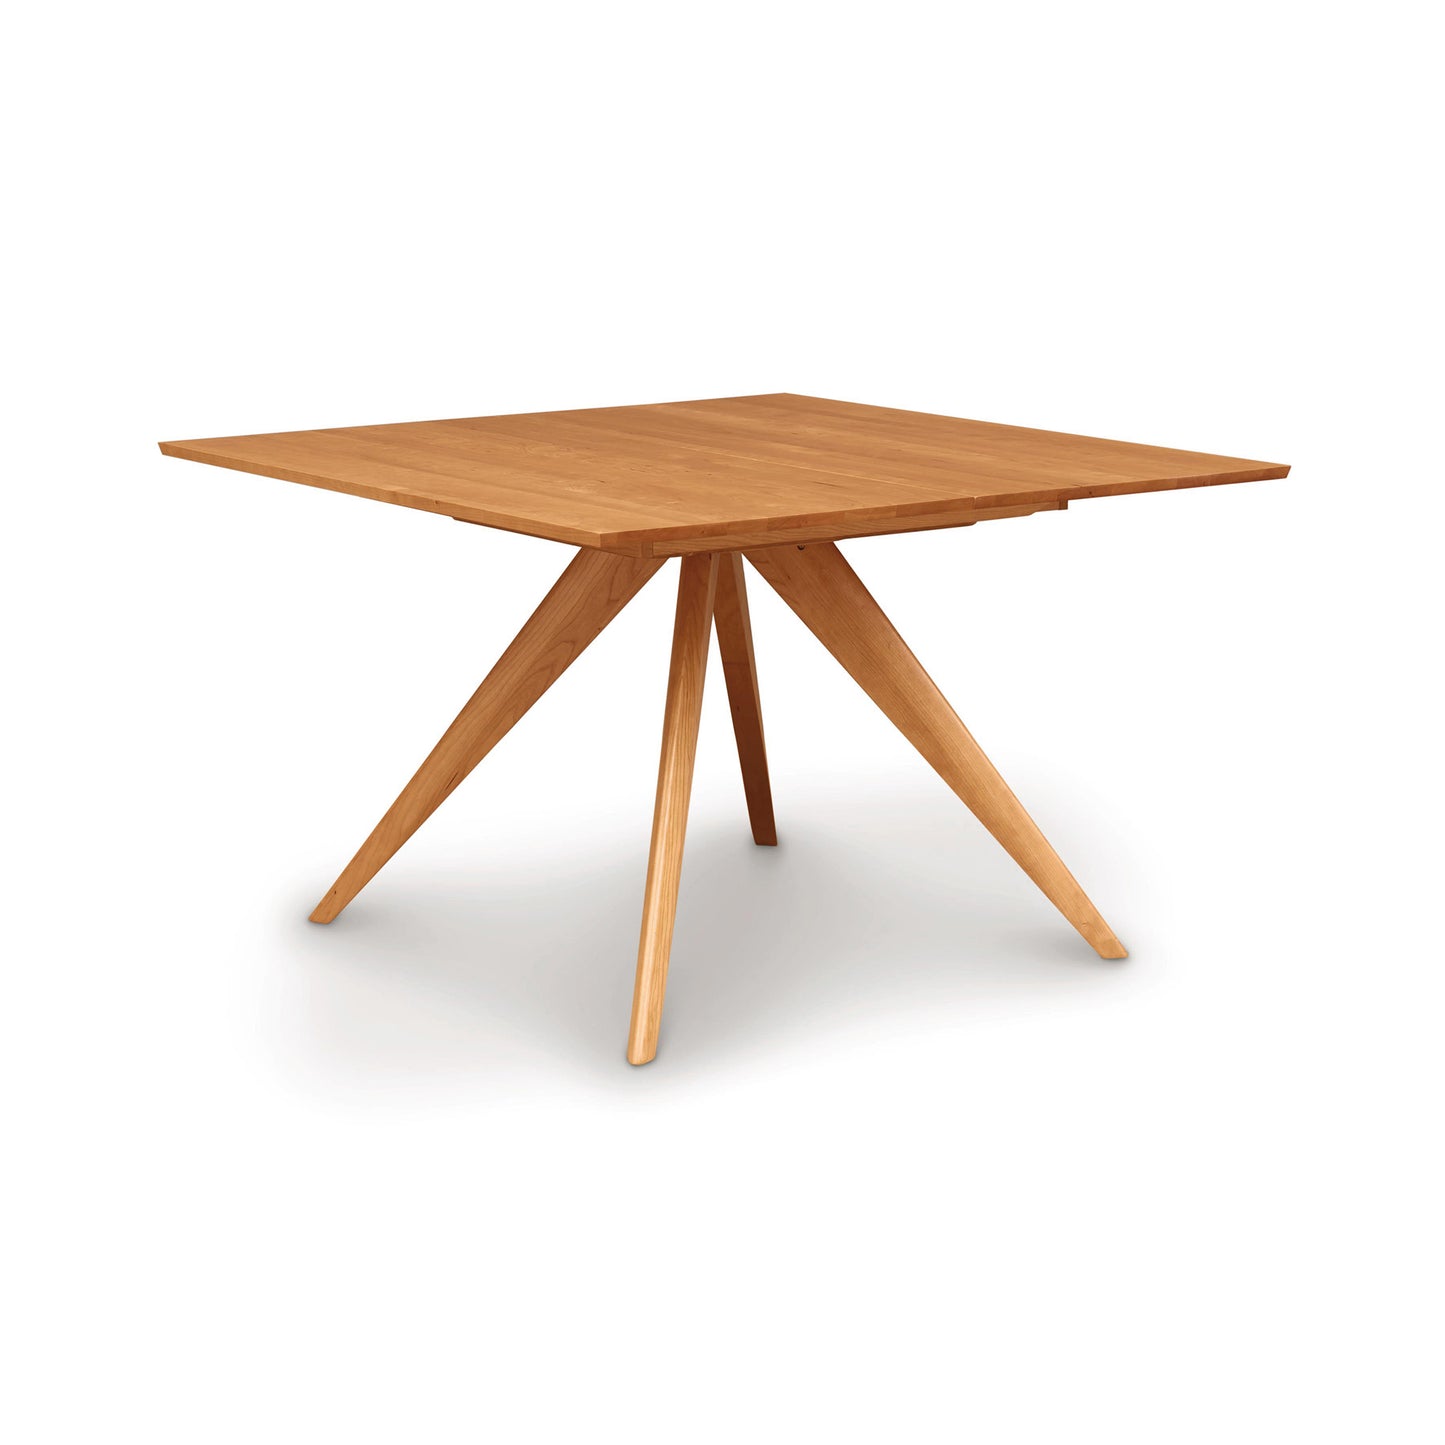 The Catalina Square Extension Dining Table from Copeland Furniture is a beautifully crafted piece of furniture that embodies mid-century styling. Made with sustainably harvested wood, this square wooden table features three sturdy legs and is designed to